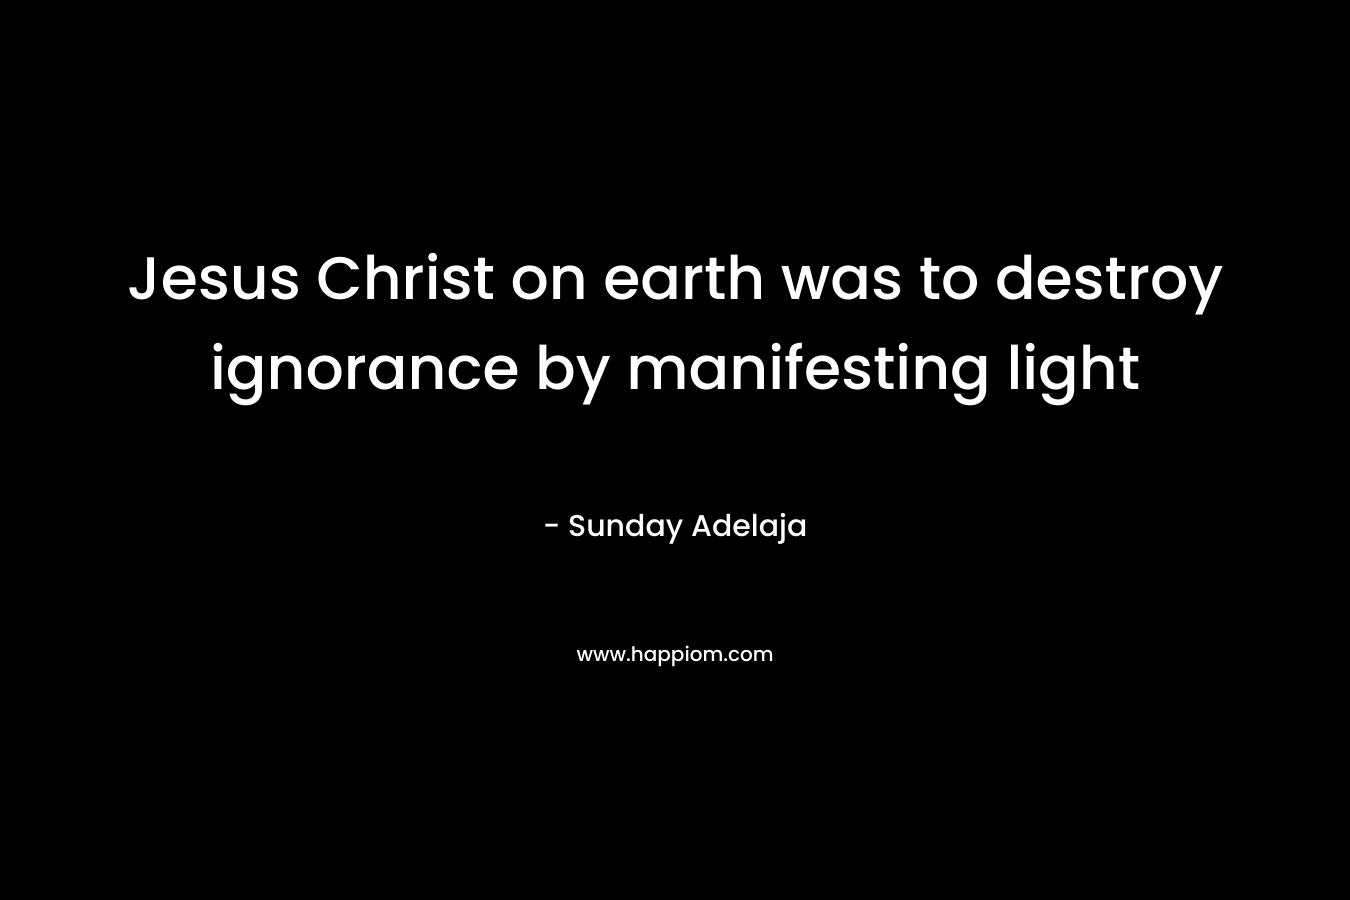 Jesus Christ on earth was to destroy ignorance by manifesting light